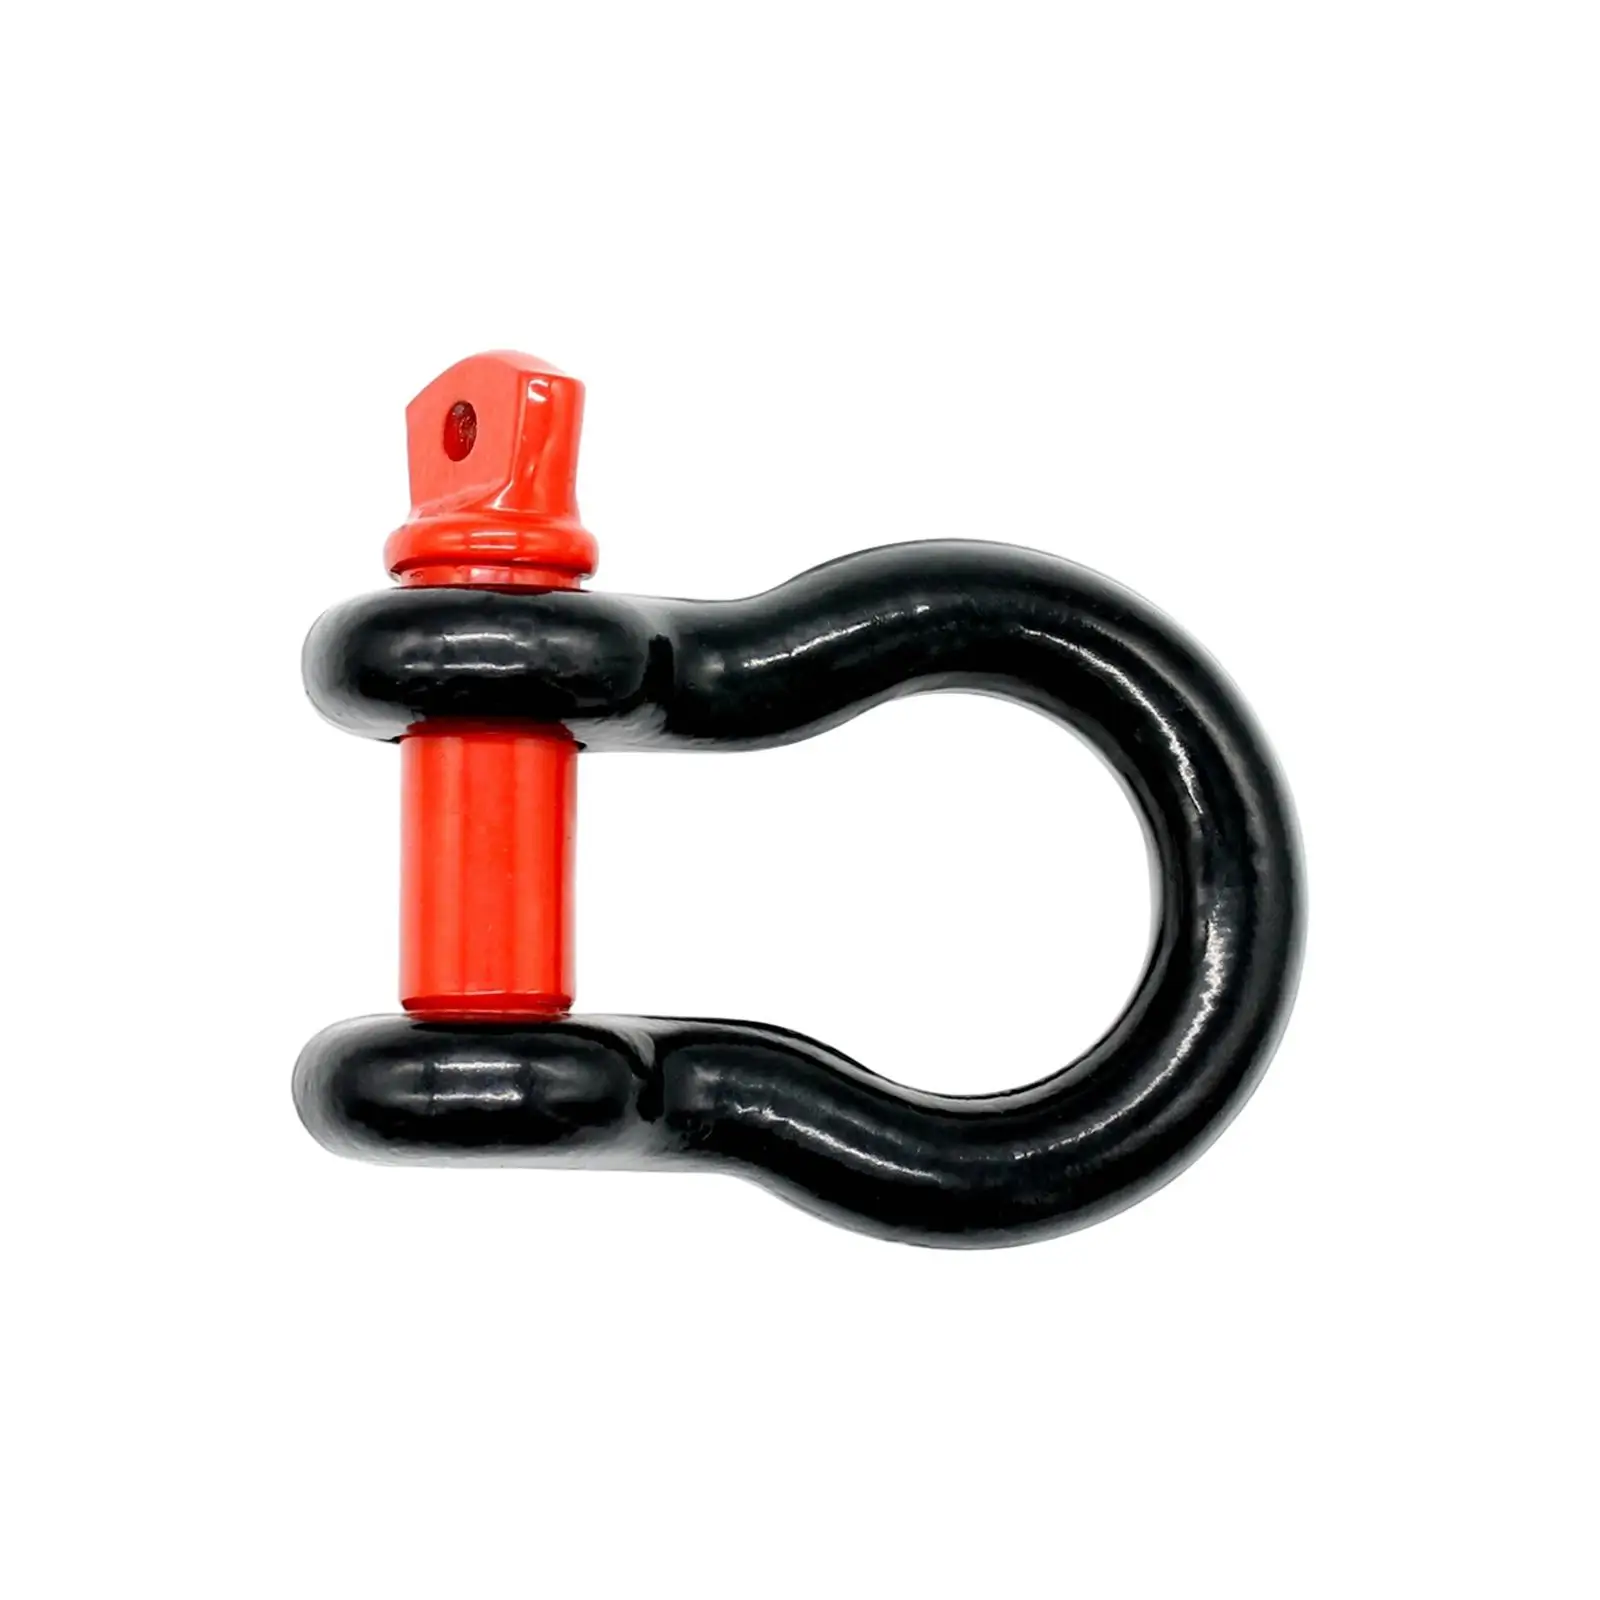 Tow Hook Ring Universal D Ring Front Tow Hook Tow Hook Trailer for Truck Winch Accessories Vehicle Long Service Life